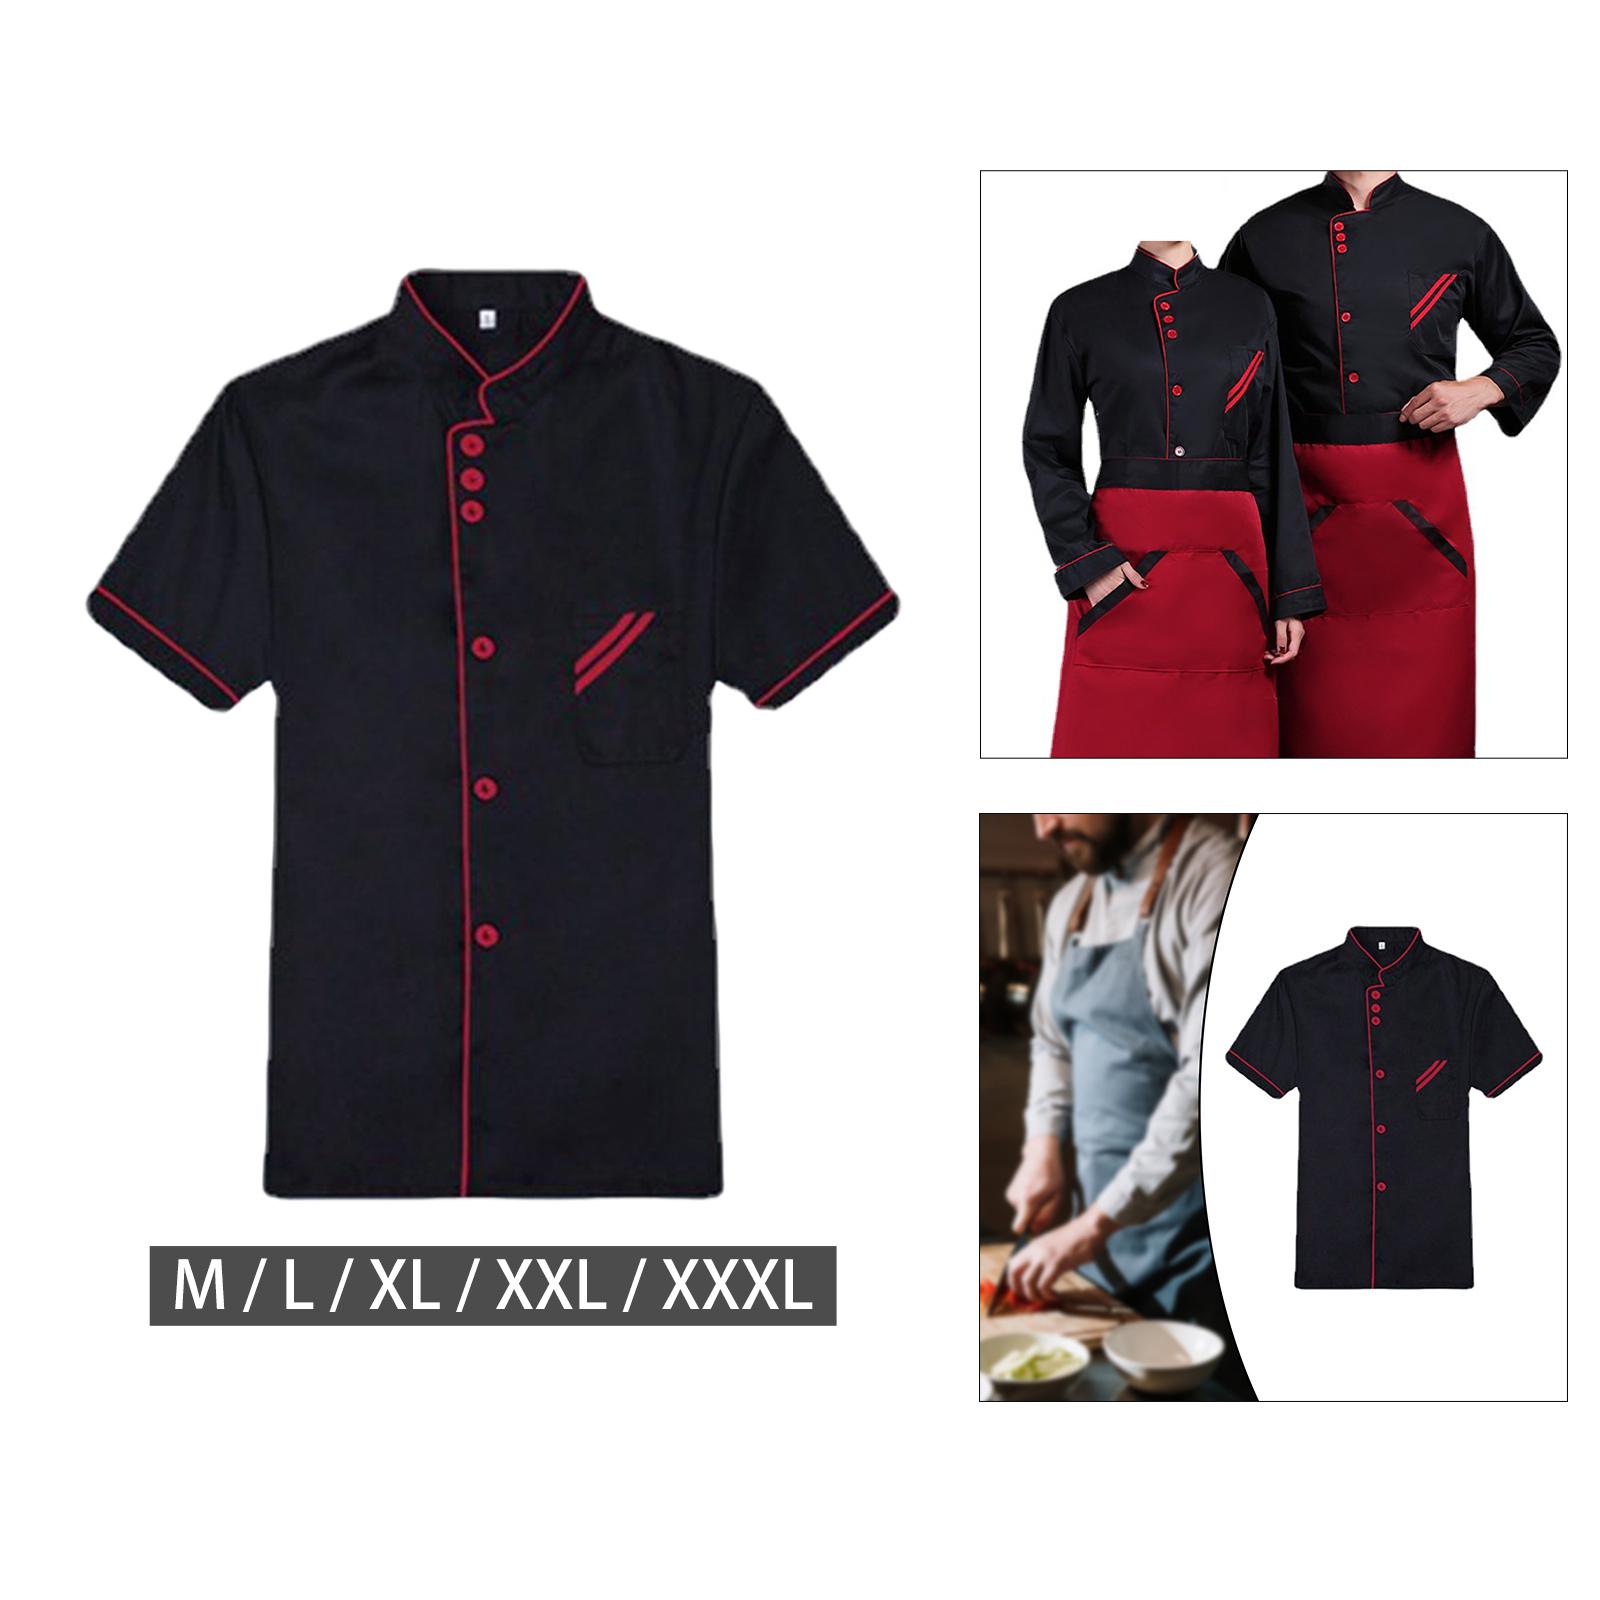 Men Women Chef Jacket Shirt Apparel Summer Short Sleeve Top Waiter Waitress Chef Uniform Workwear Chef Clothes for Cafe Catering